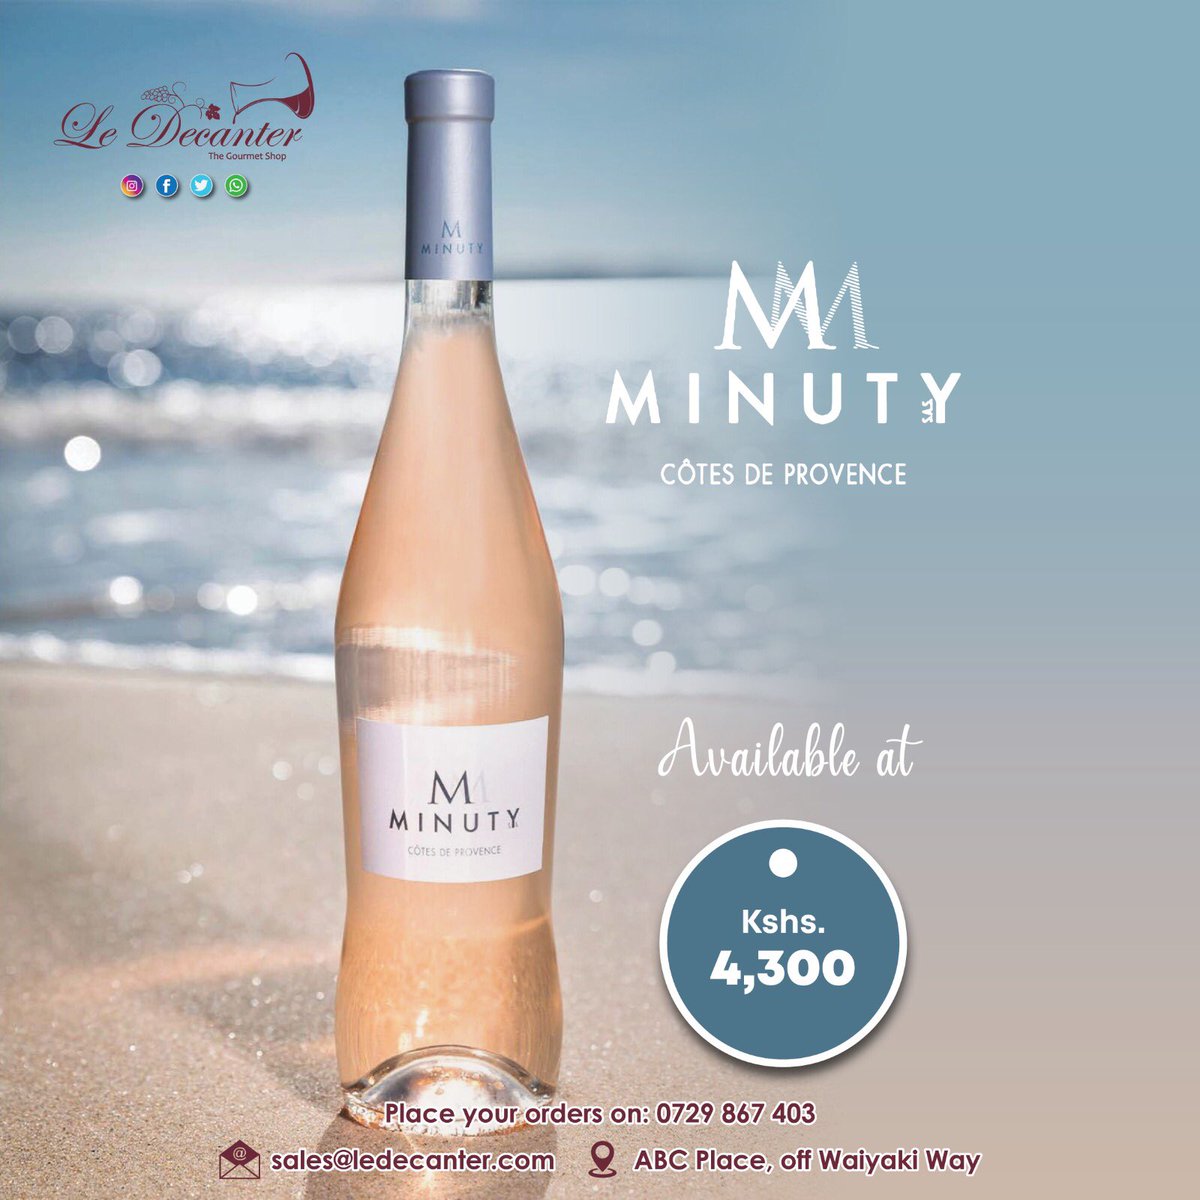 MINUTY M is pure Pleasure, pure Provence and pure Minuty in a bottle. Pure Pleasure because of its natural and easy-going vibe. You can get it from our shop at 4,300/=   To order  kindly call us on 0729867403/email us on sales@ledecanter.com   #ledecanter #winesfromfrance